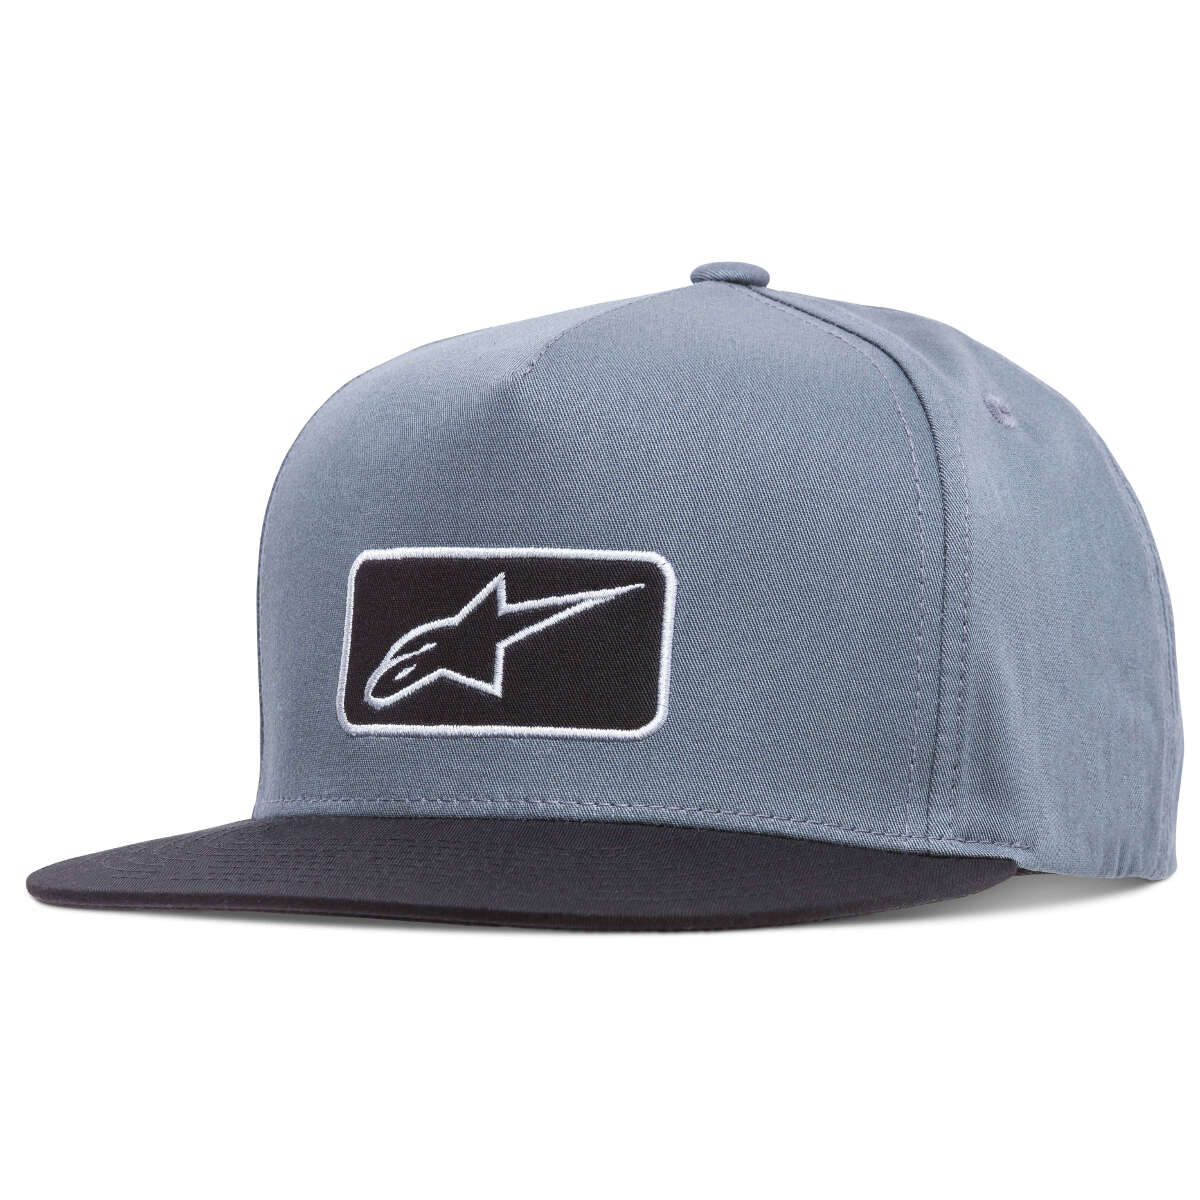 Alpinestars Casquette Snap Back Plate Charcoal